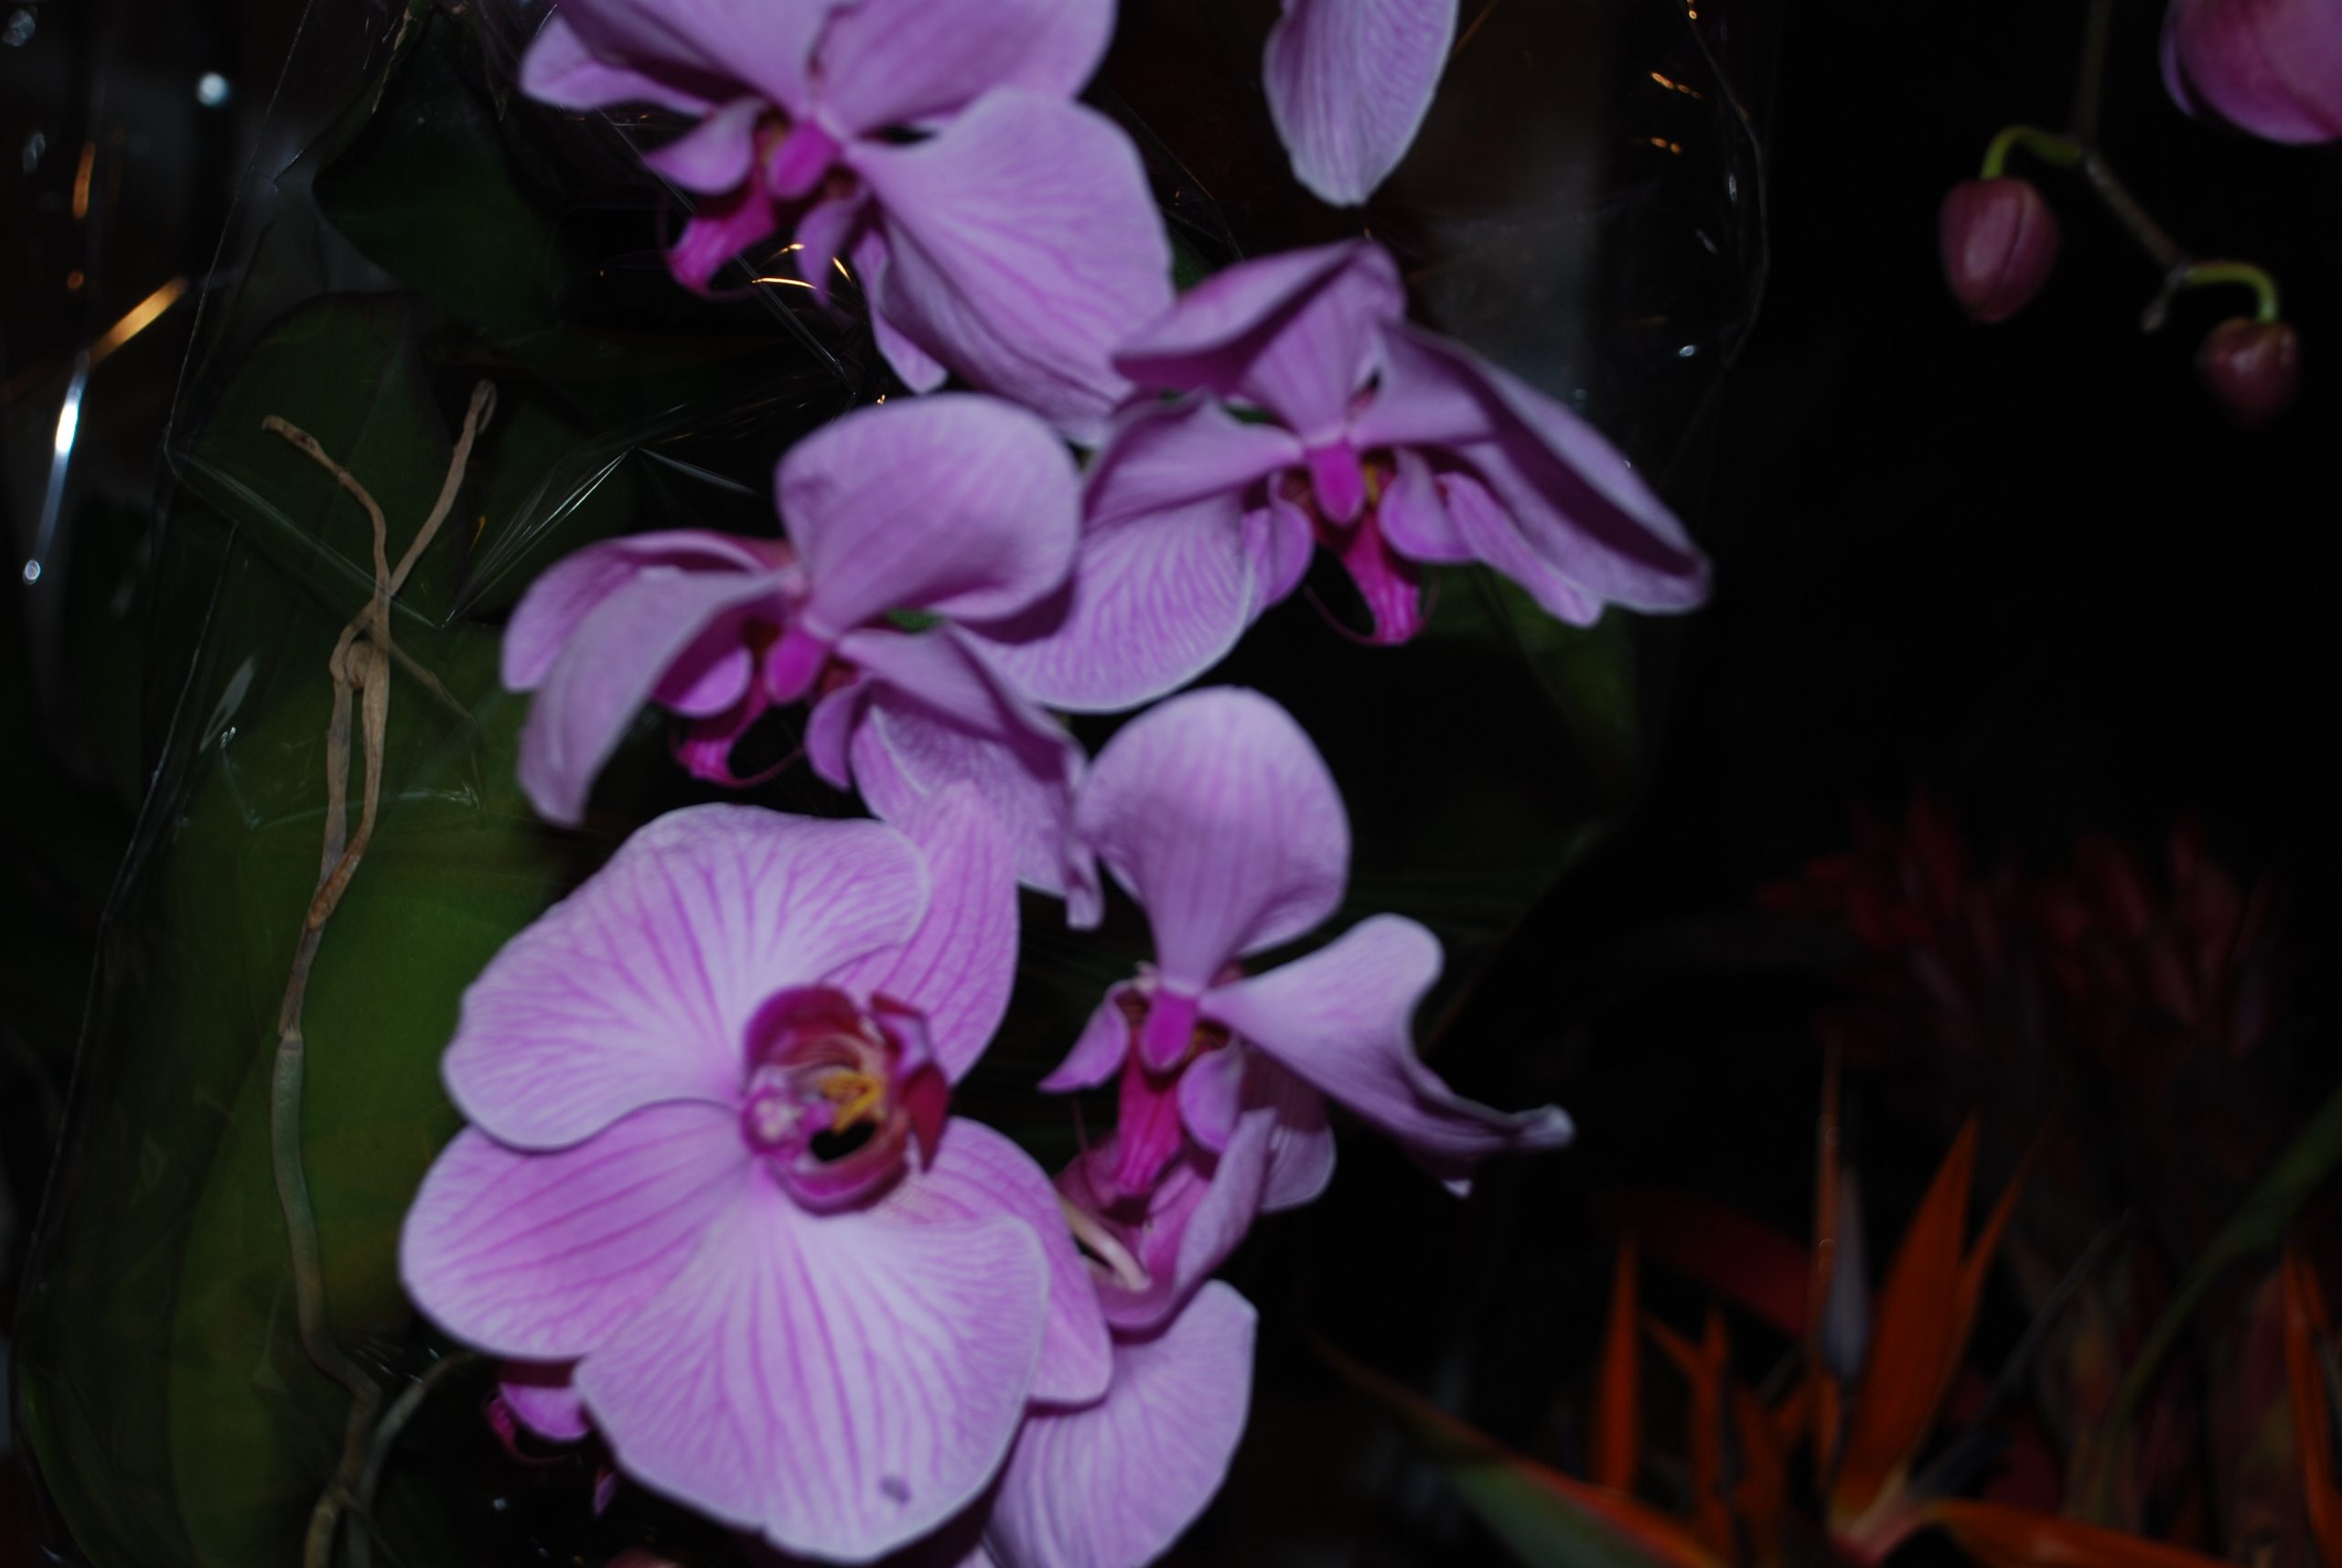 Orchids for Sale (user submitted)